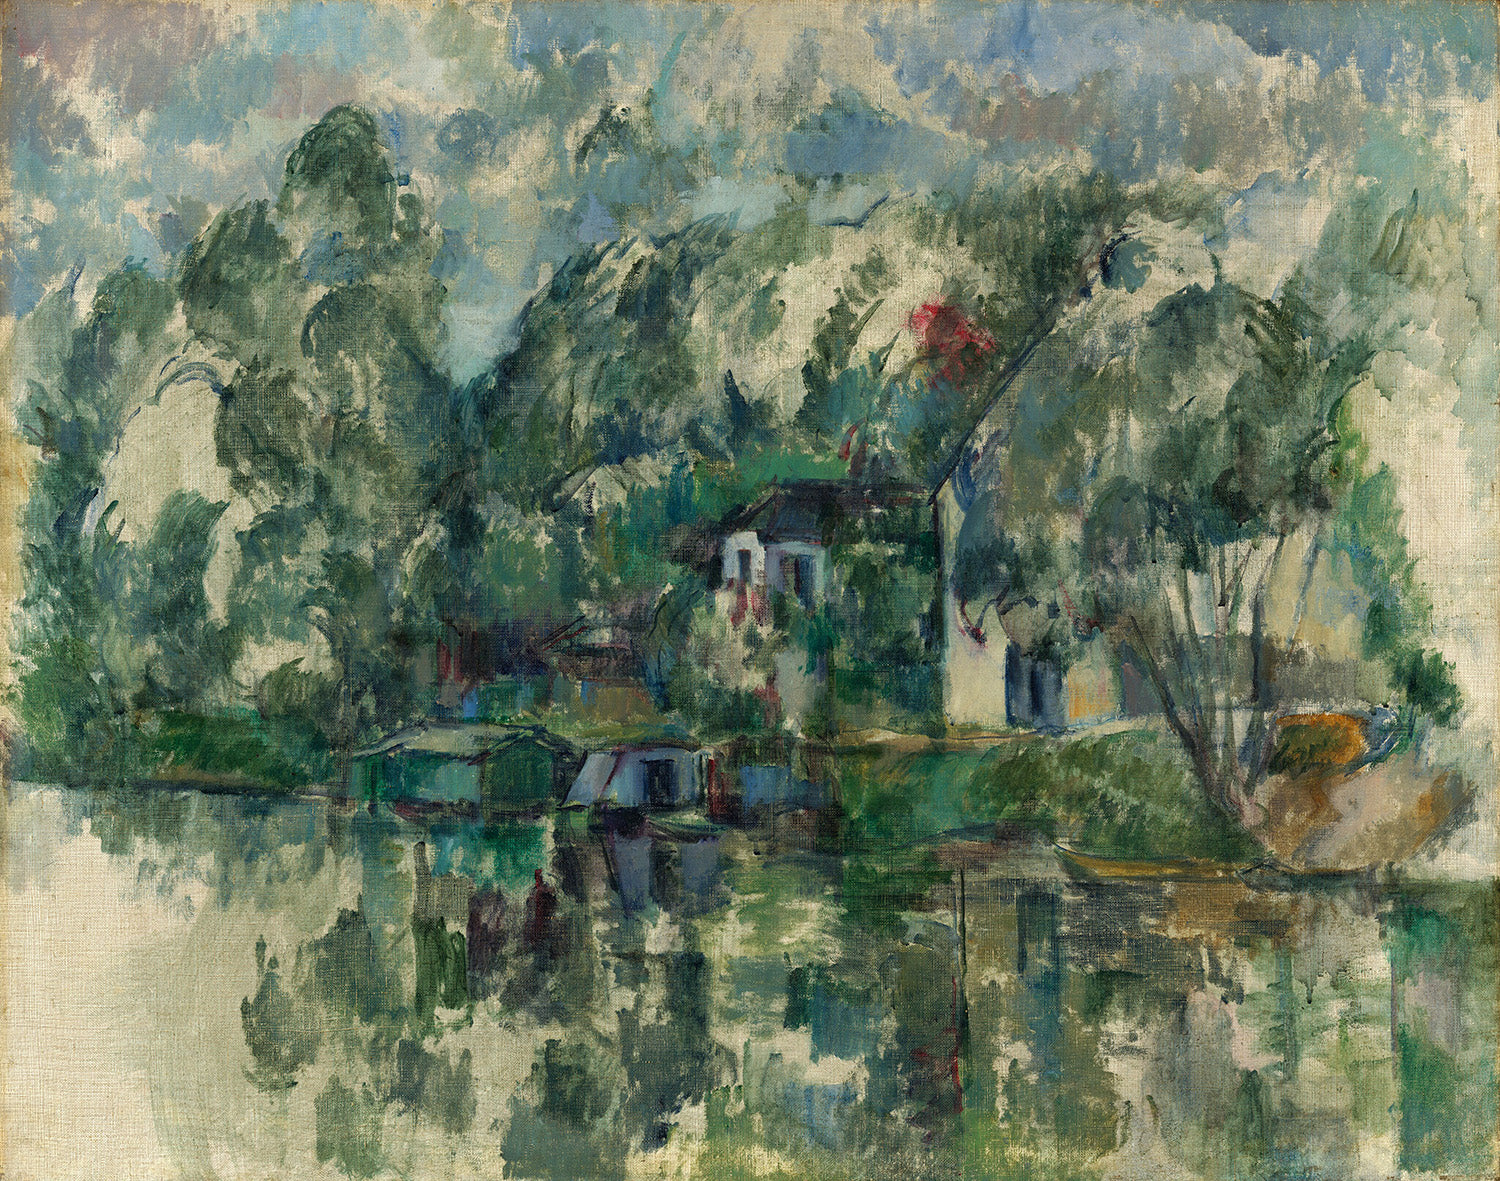 At the Water's Edge by Paul Cezanne Art Print